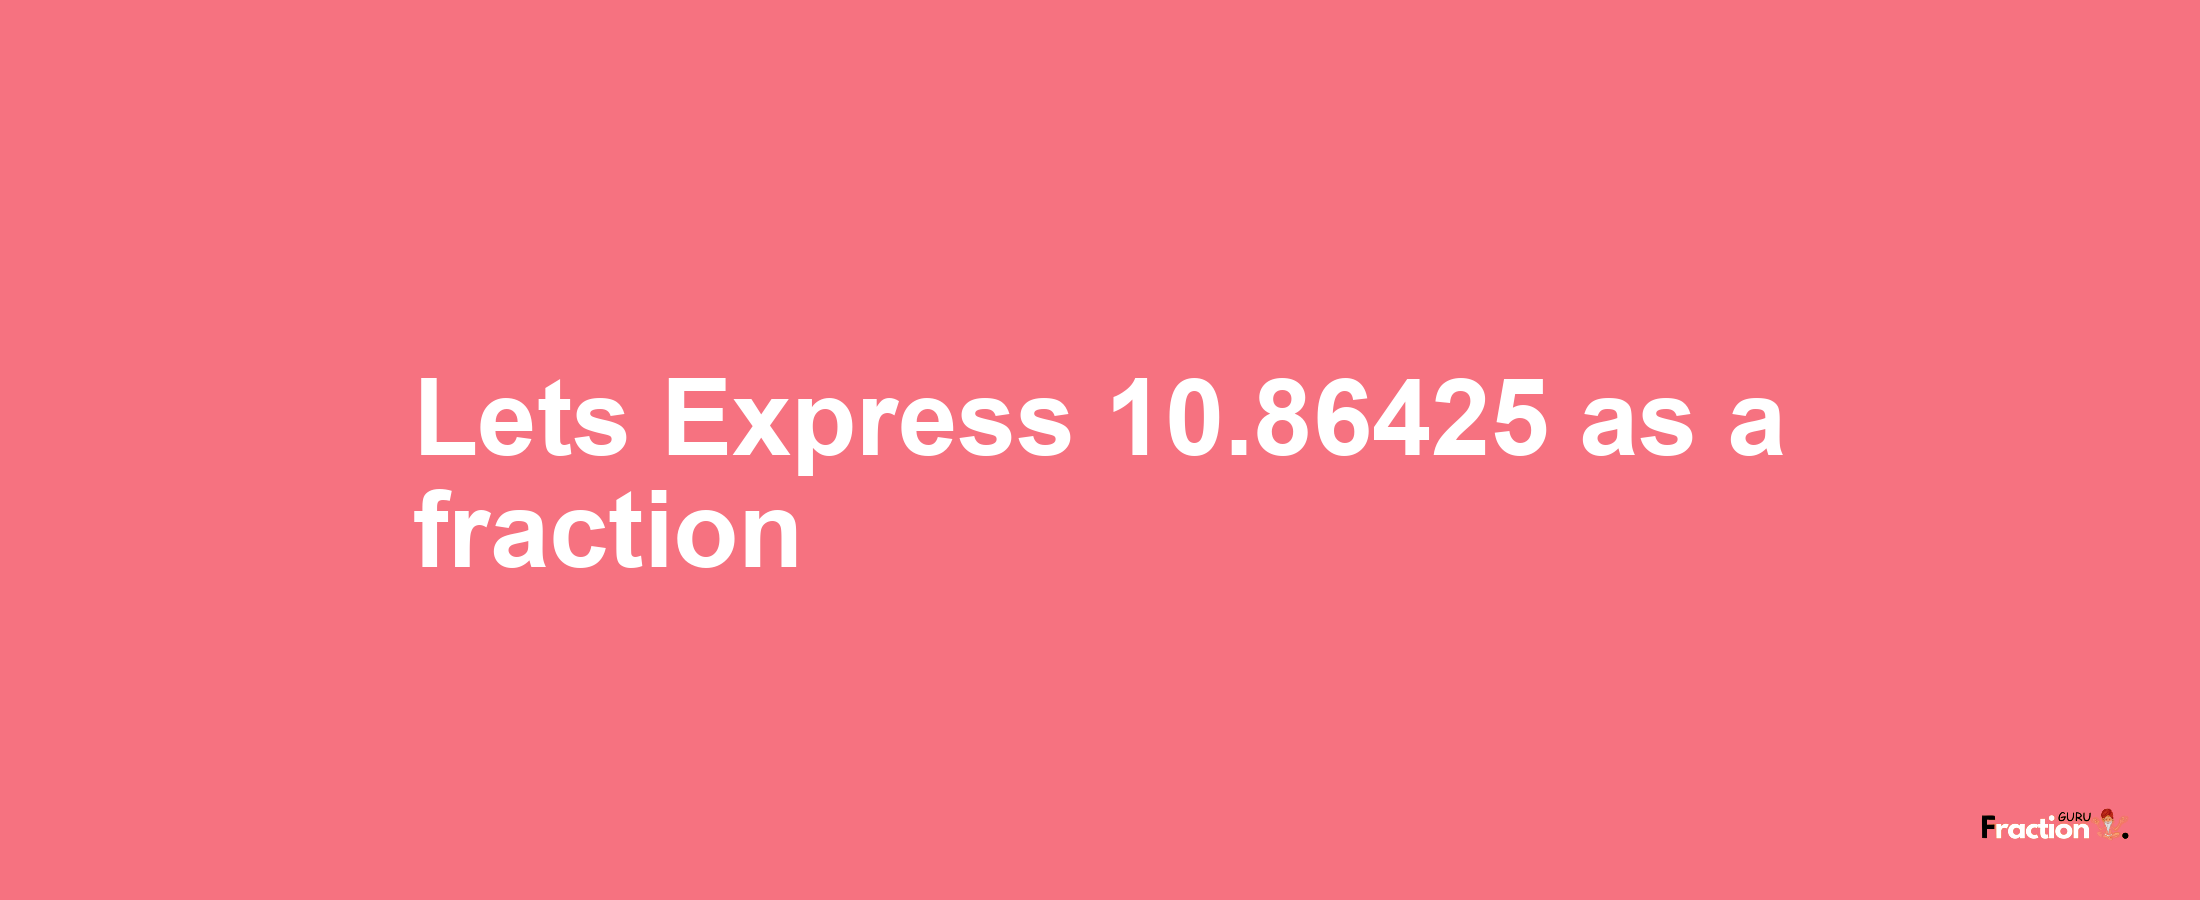 Lets Express 10.86425 as afraction